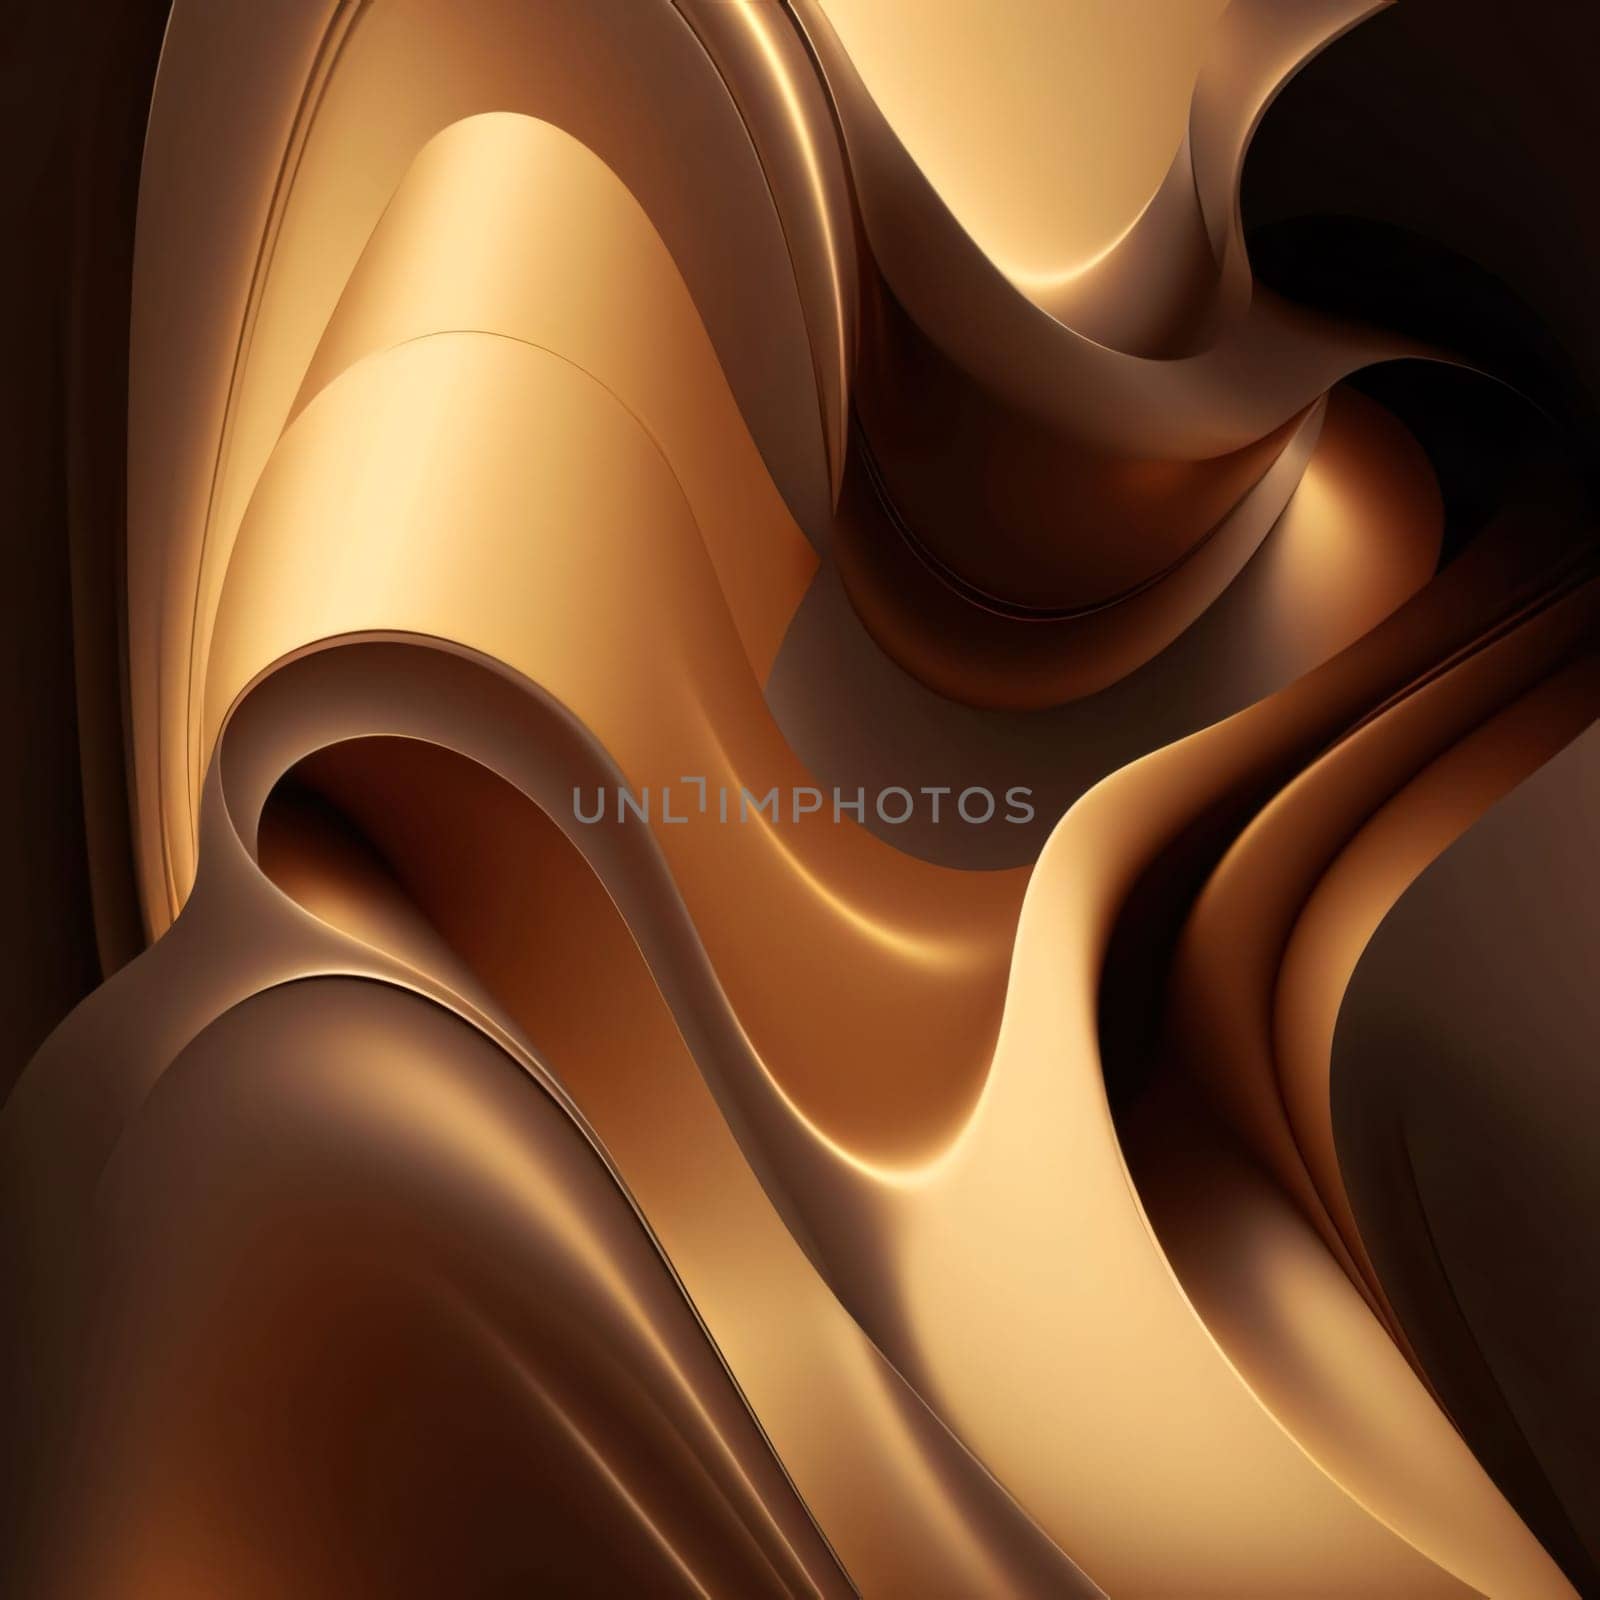 Abstract background design: 3d render of abstract background with smooth wavy lines in golden colors